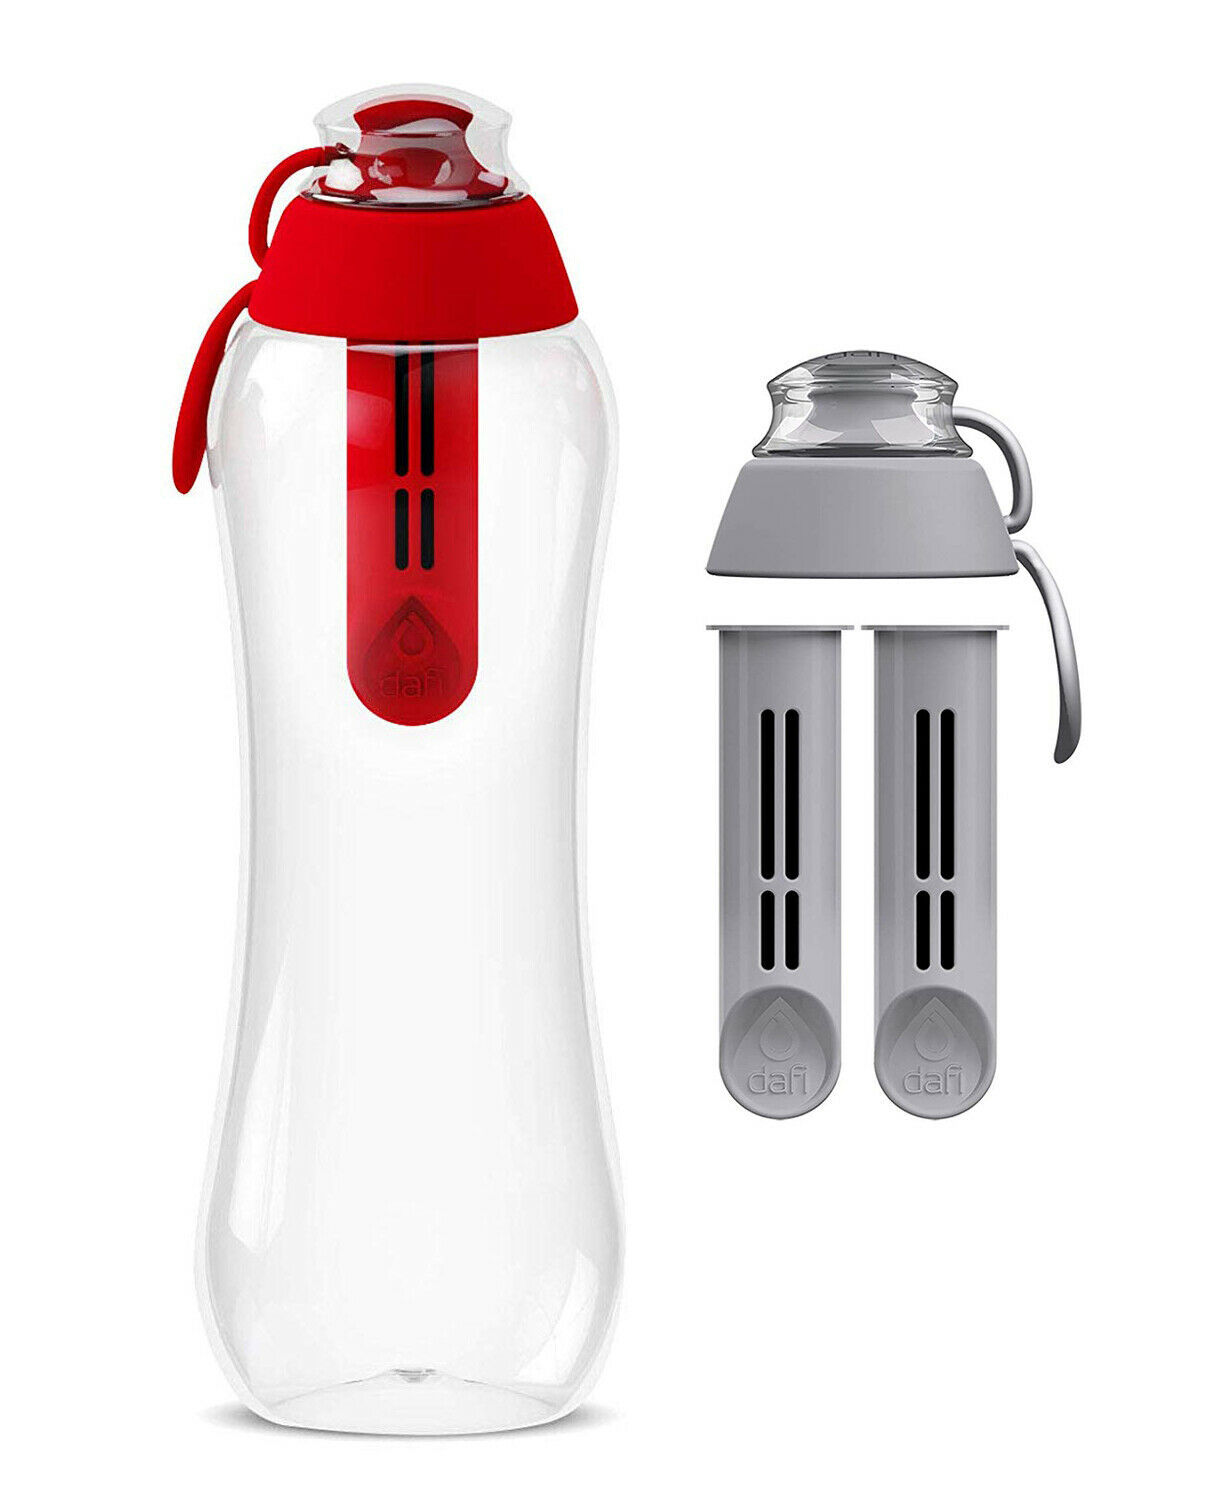 Dafi Filtering Water Bottle Red 17 oz with 2 Gray Filters + 1 Gray Cap BPA FREE